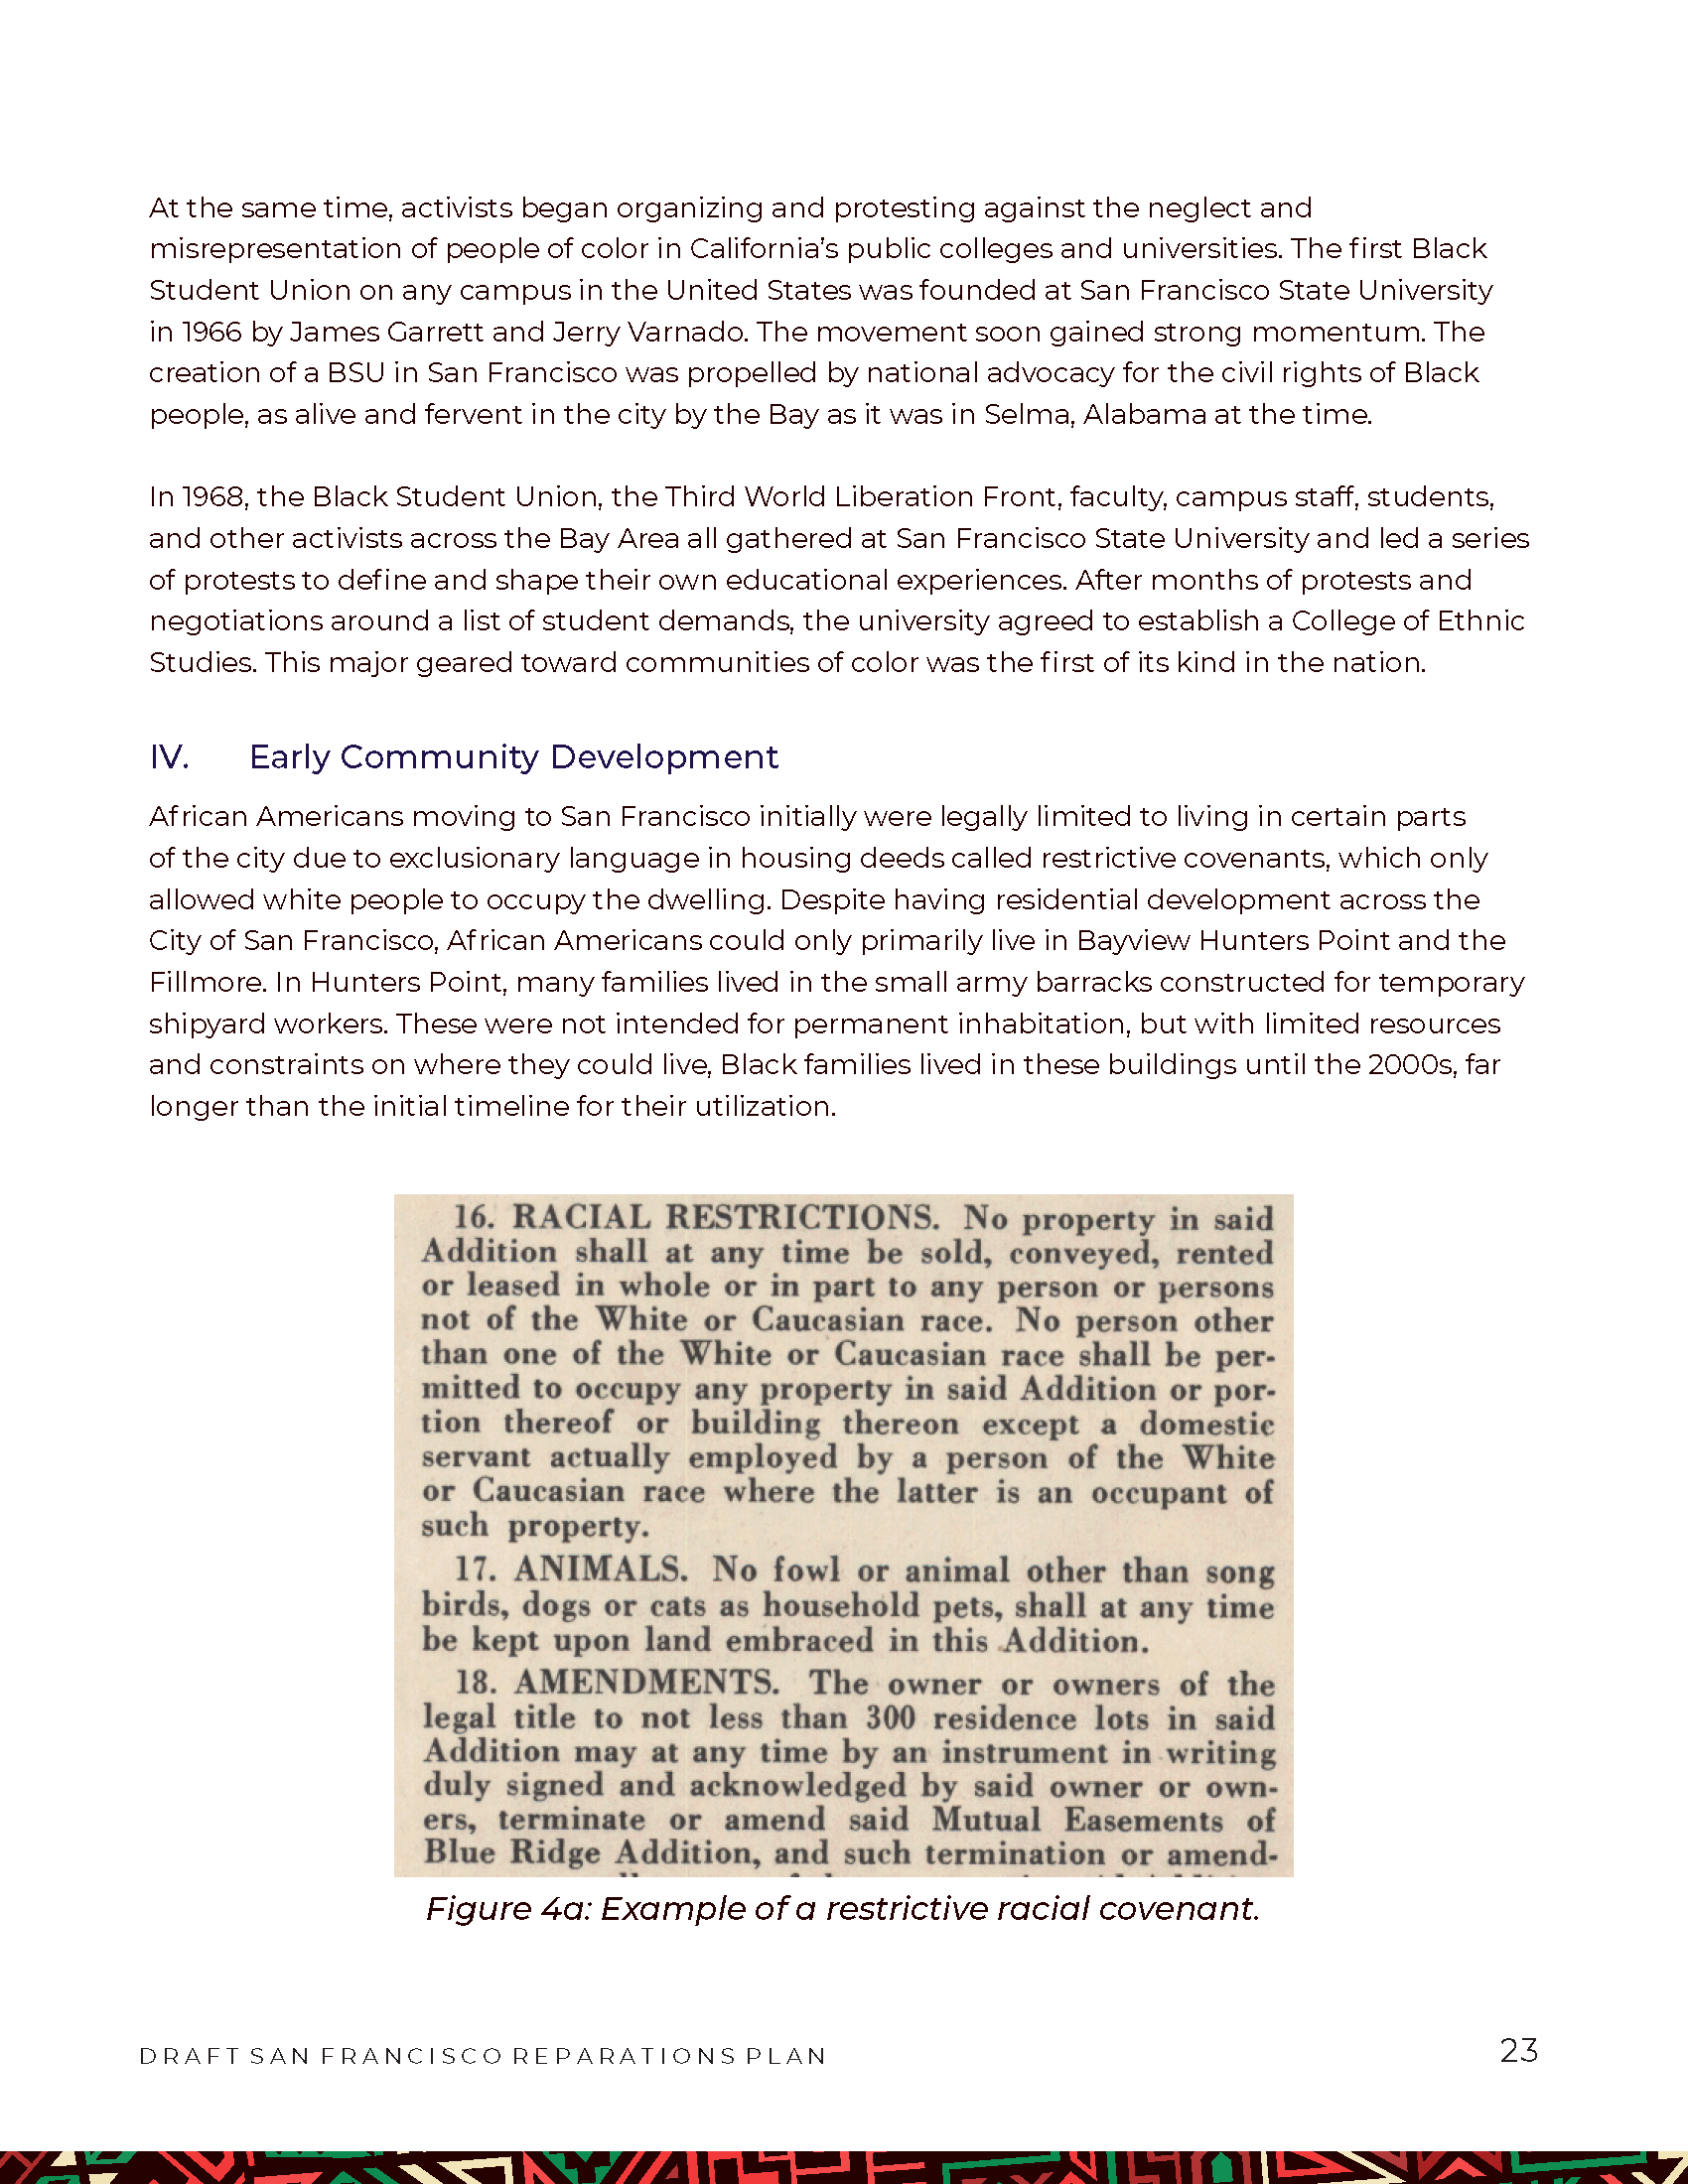 HRC Reparations 2022 Report Final_0_Page_23.png